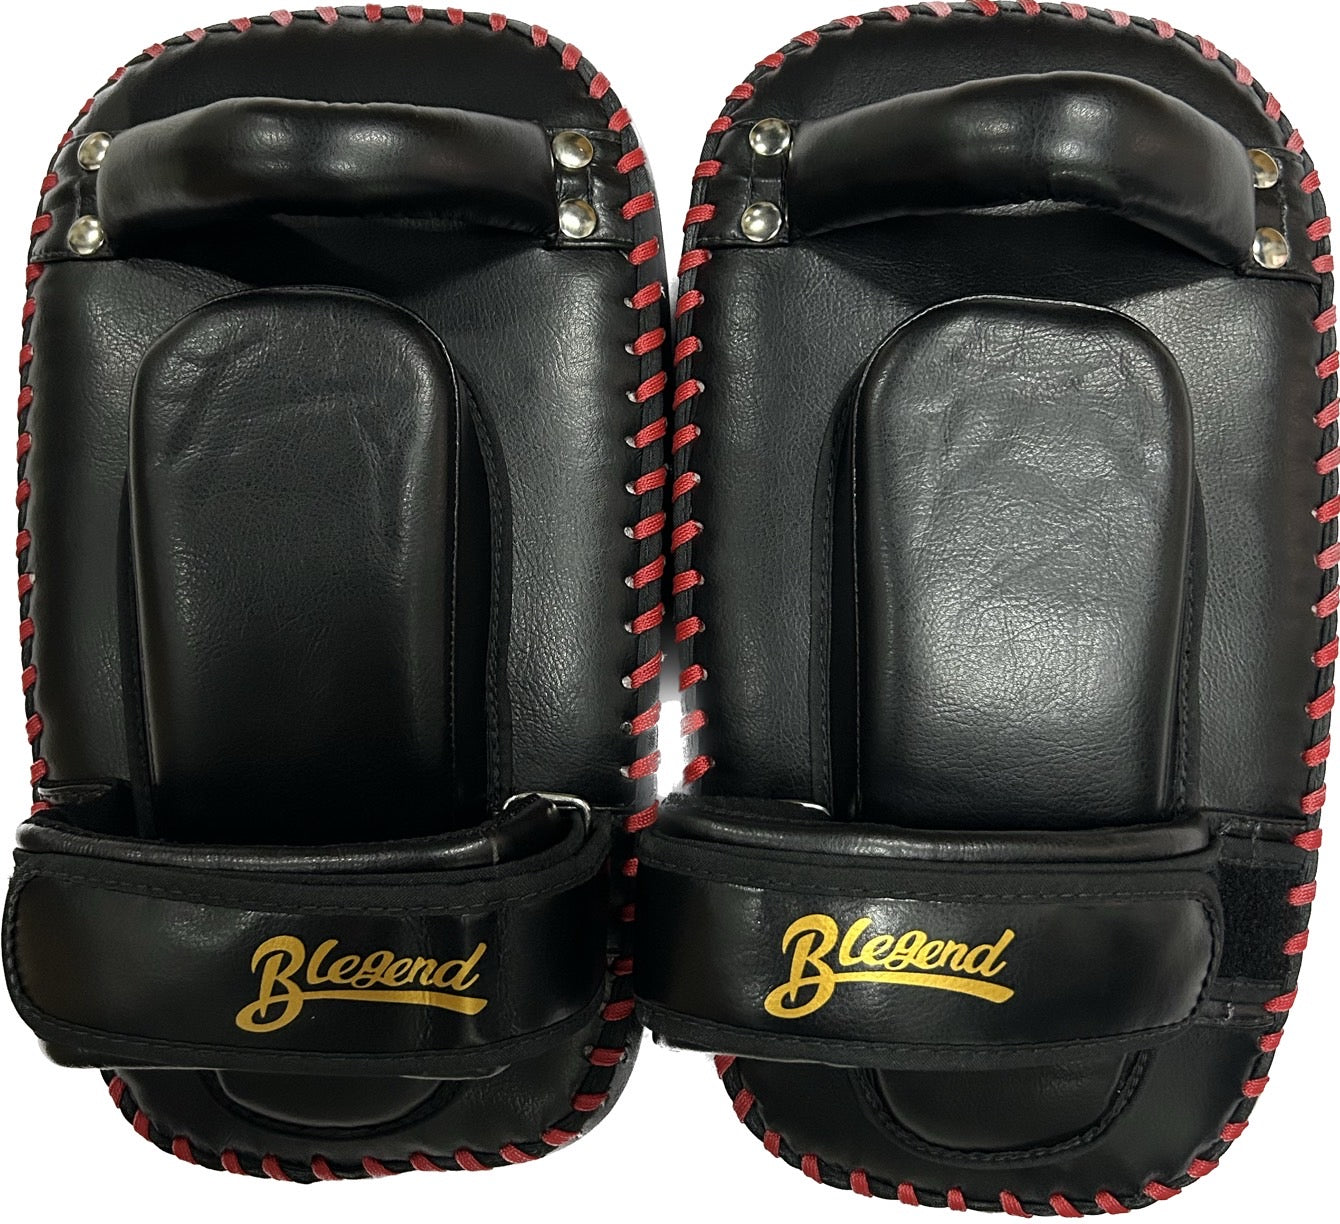 Blegend Thai Pads TP12 With 1 Strap